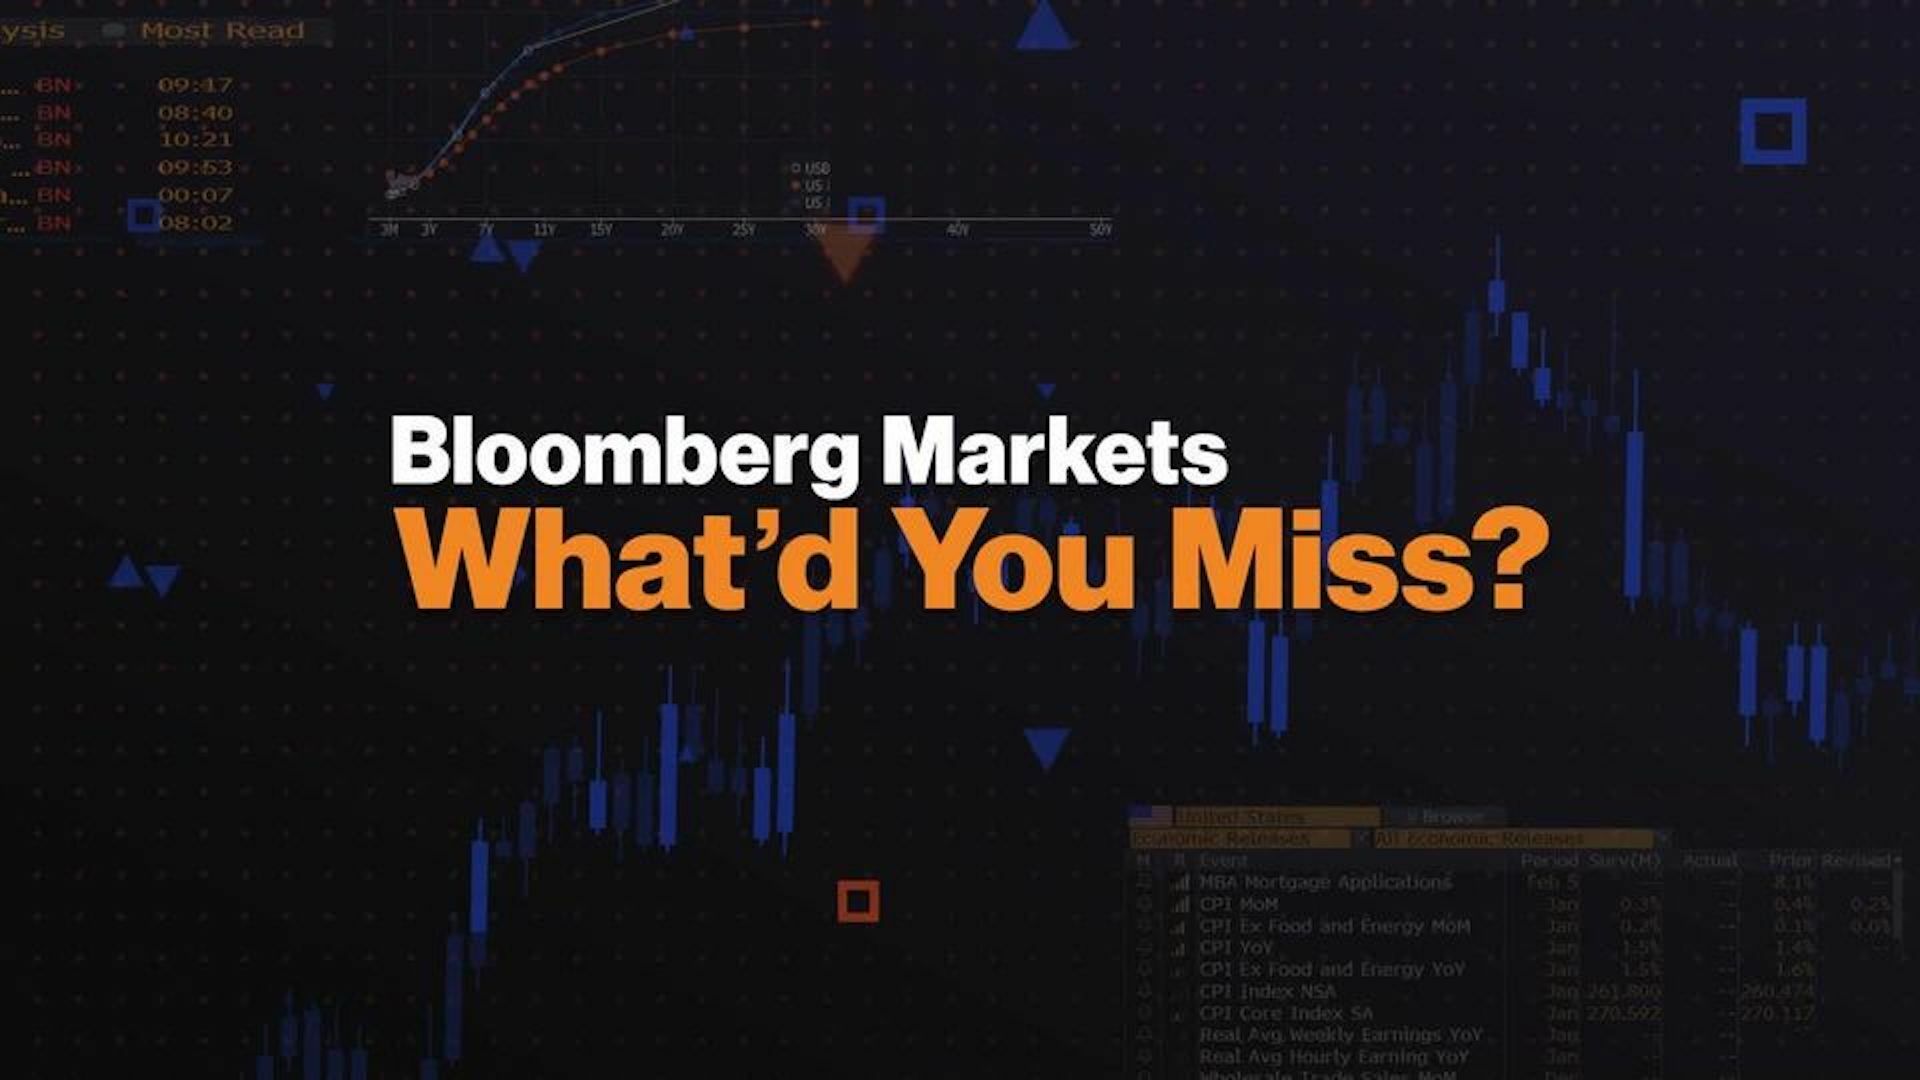 Bloomberg Markets: What'd You Miss?